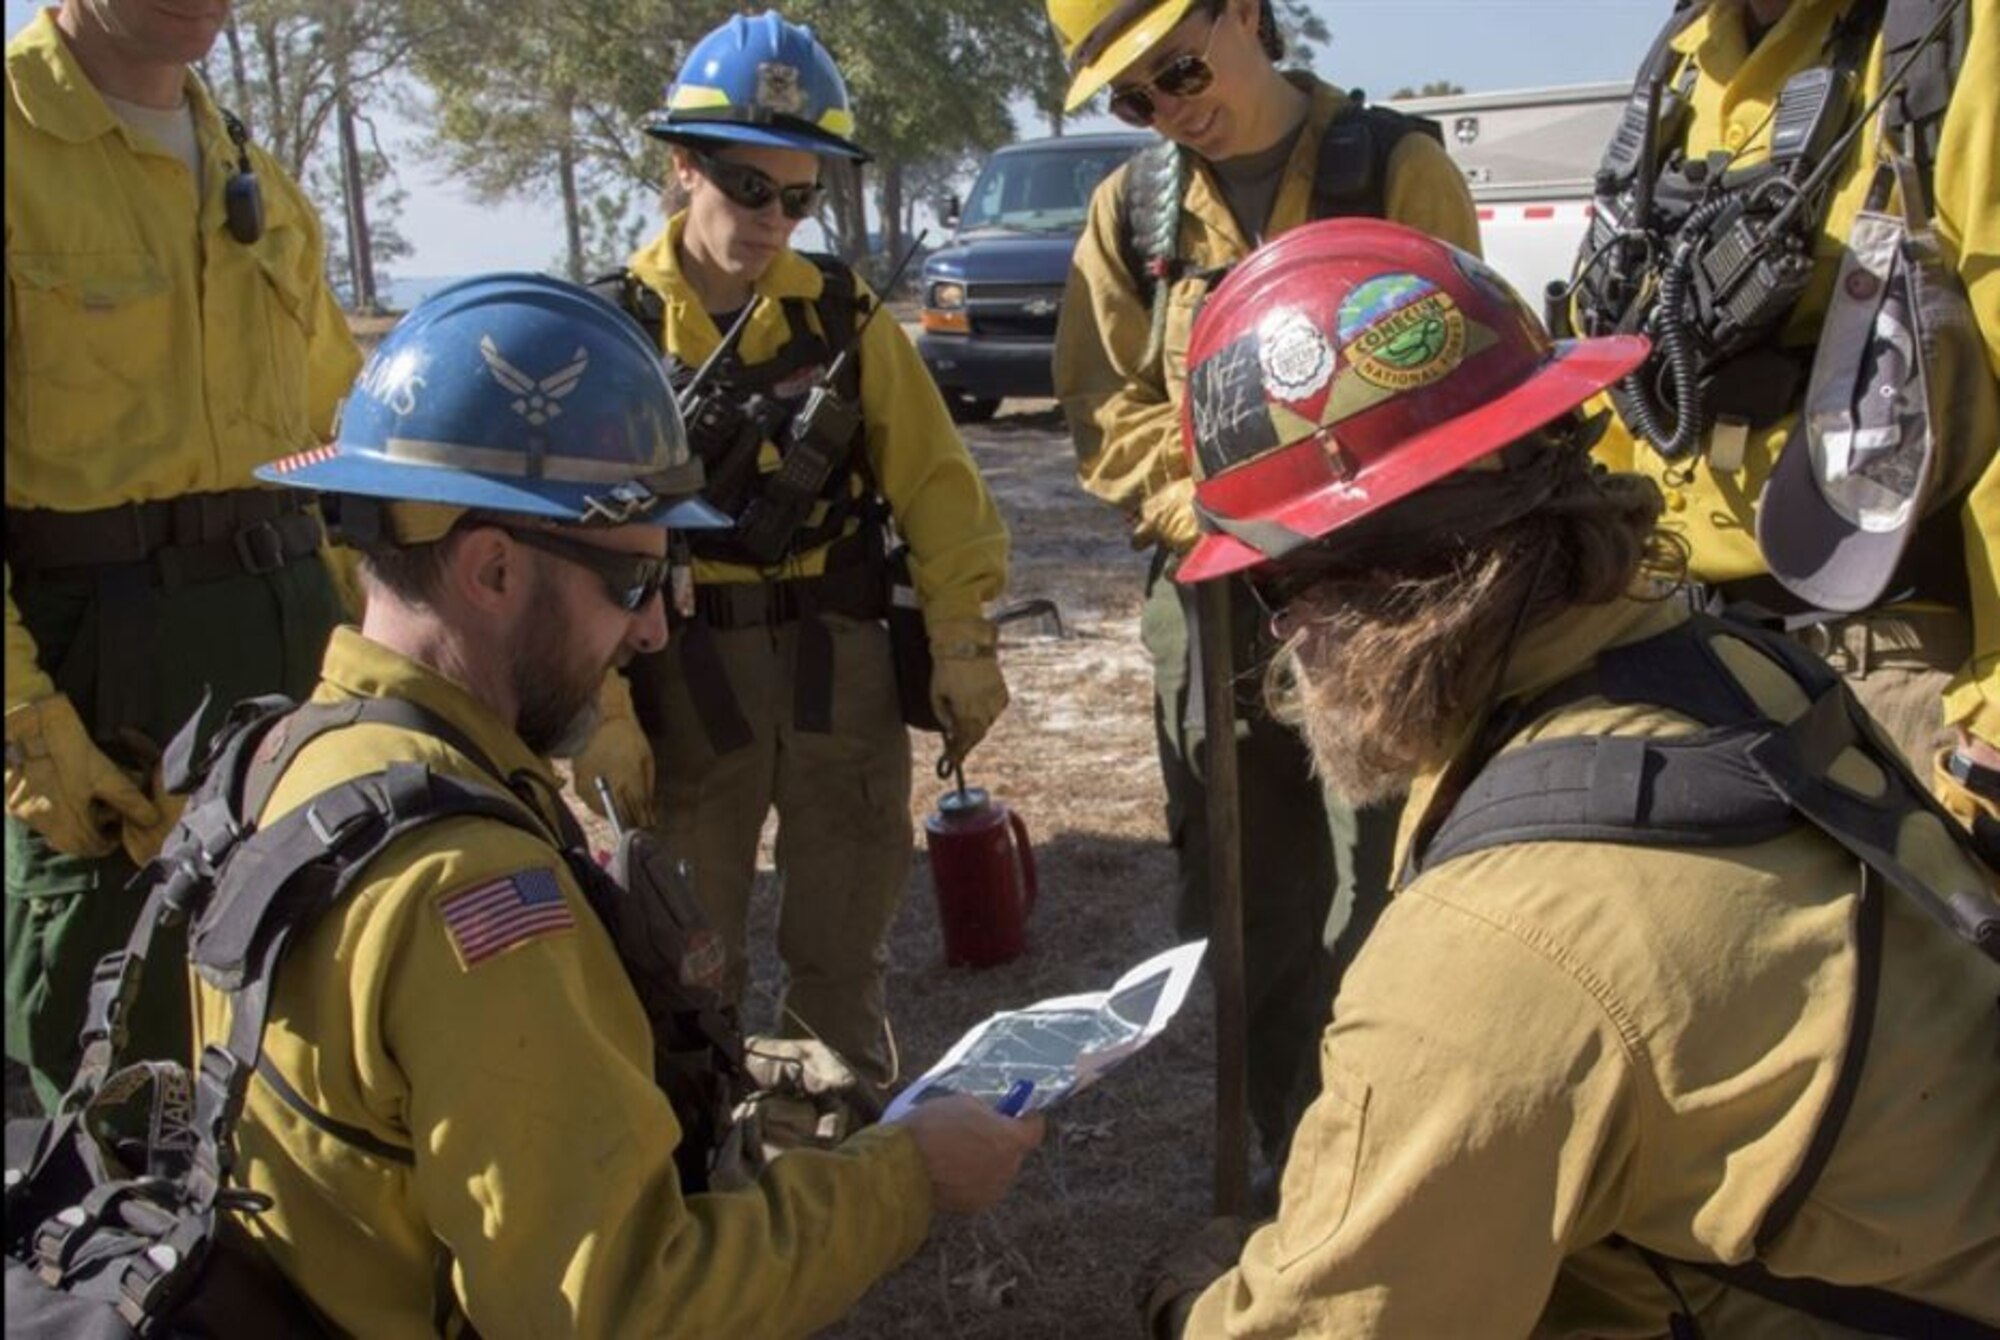 The Air Force Civil Engineer Center’s Wildland Fire Branch hasn’t let the COVID-19 pandemic stop it from protecting Airmen and their families as well as wildlife during this year’s severe fire season.